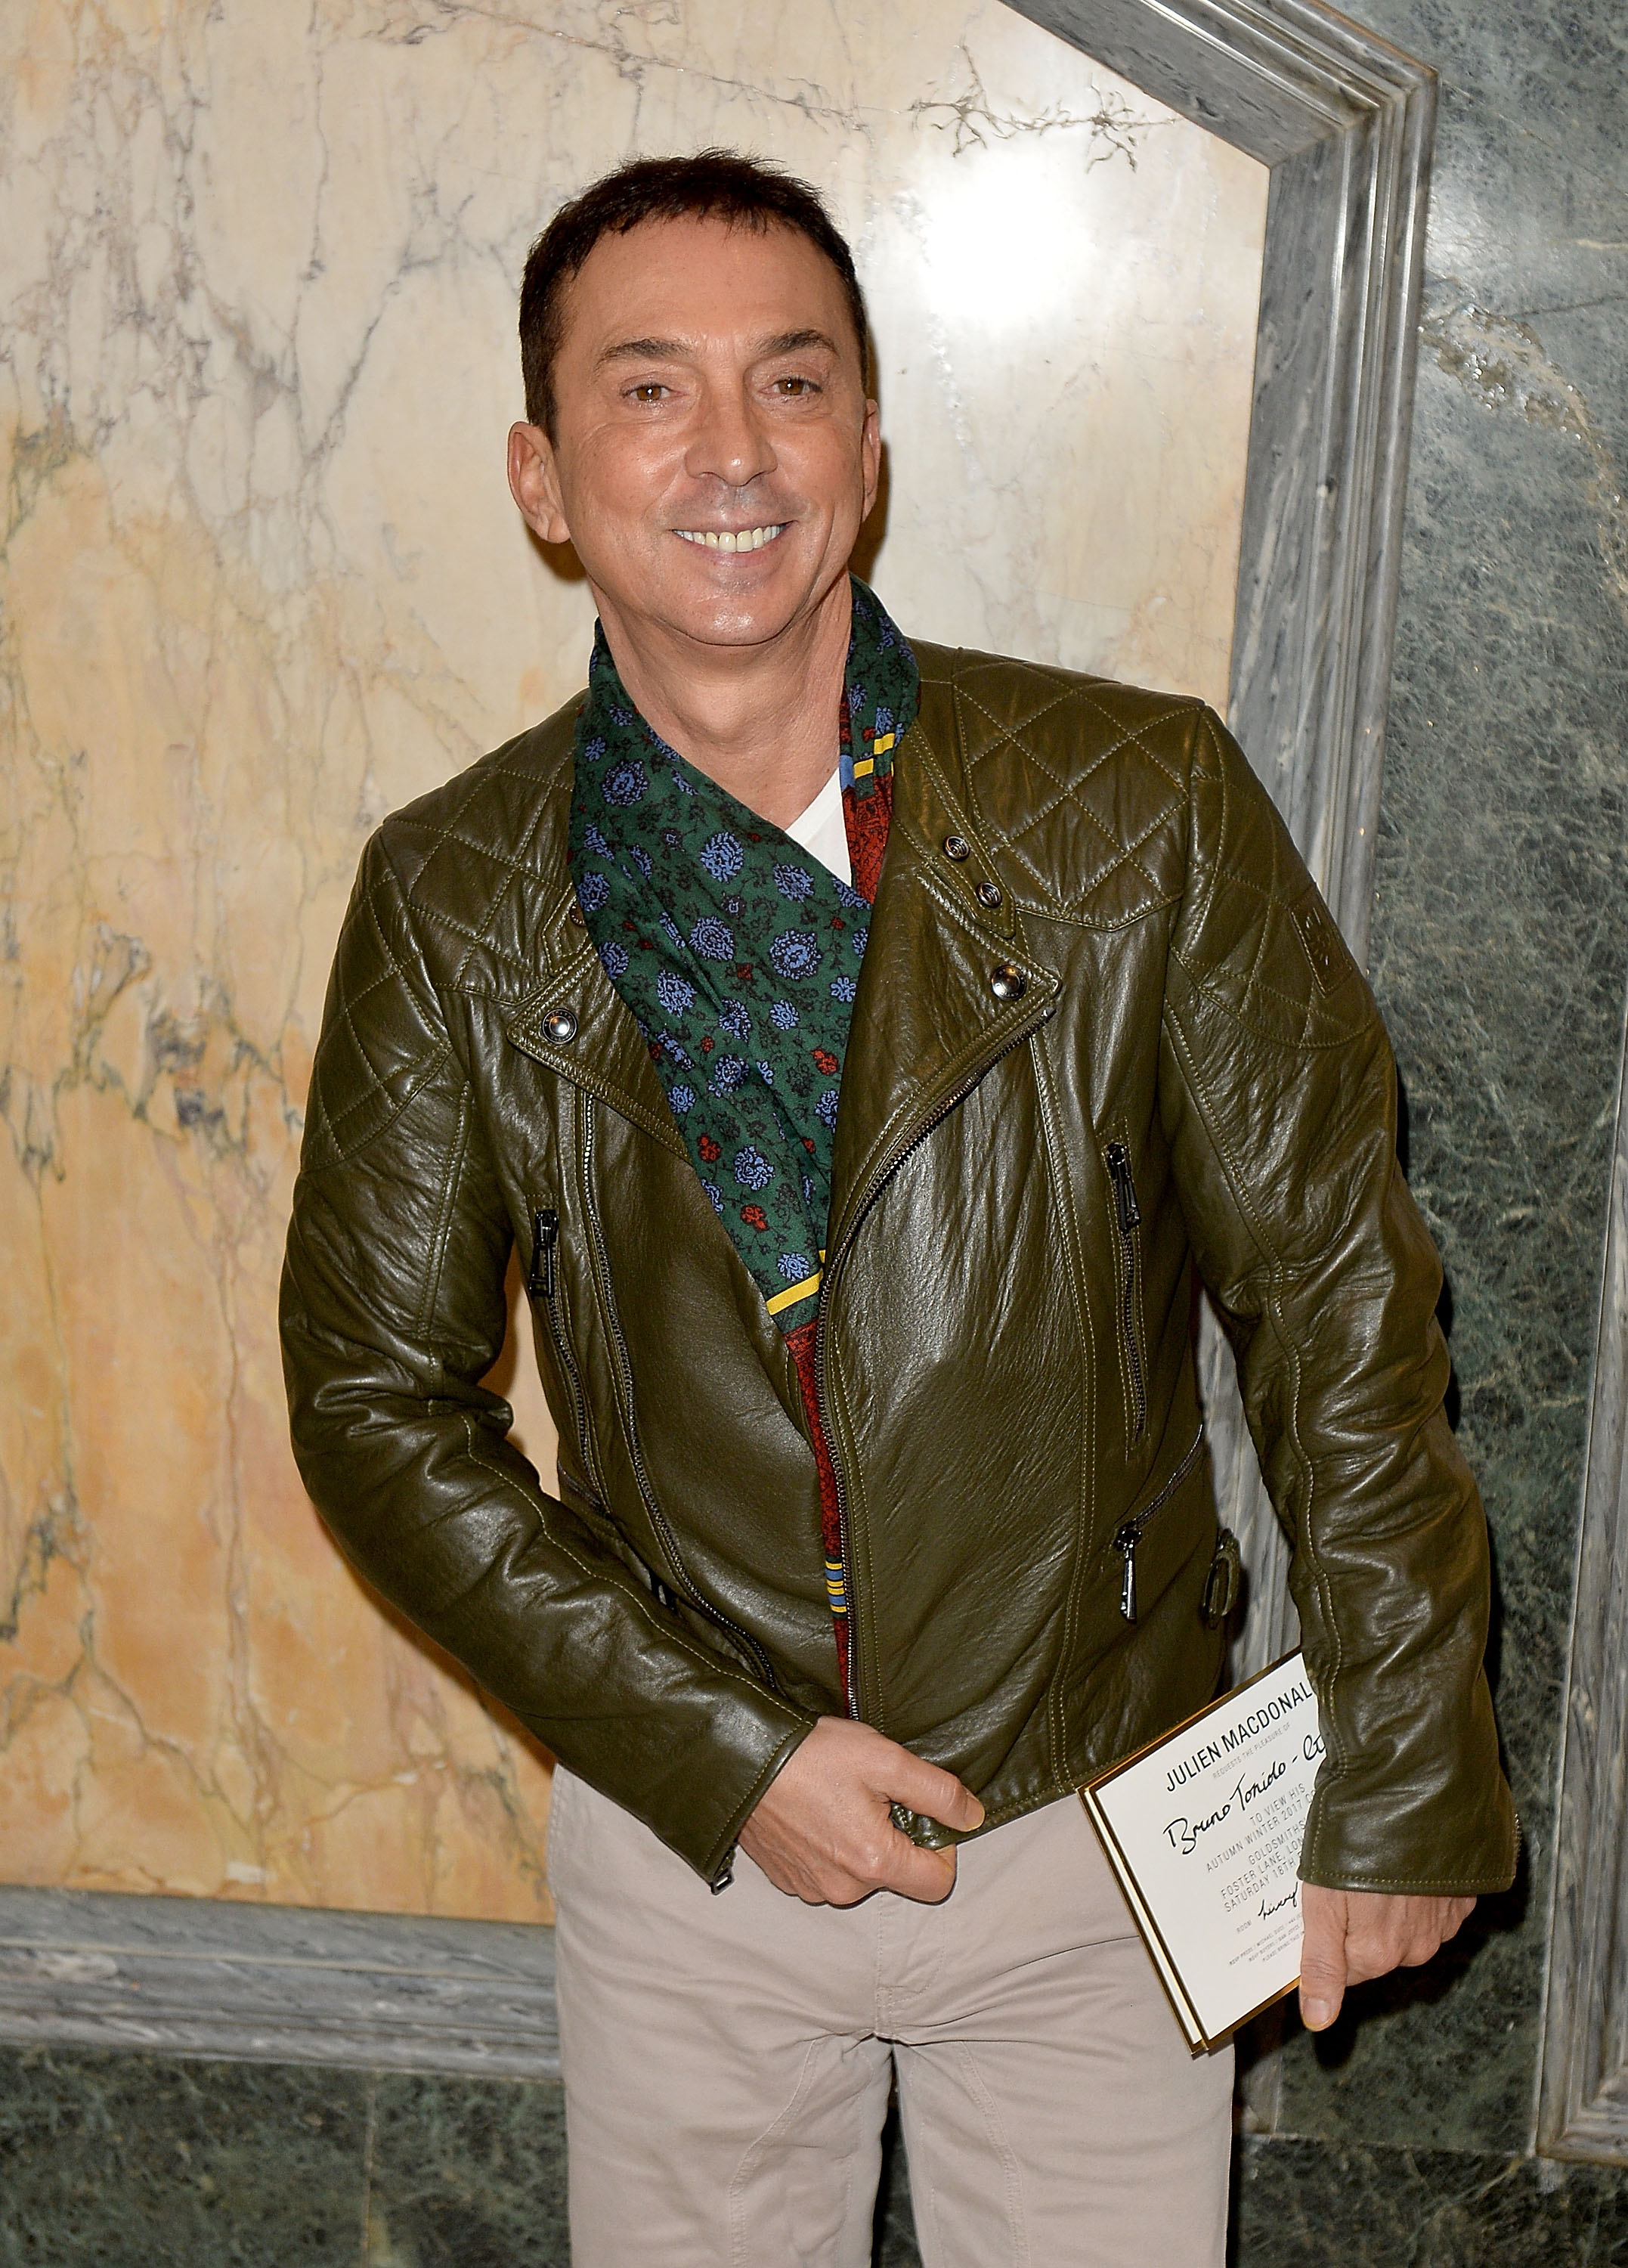 Bruno Tonioli attends the Julien Macdonald show during the London Fashion Week February 2017 collections on February 18, 2017, in London, England. | Source: Getty Images